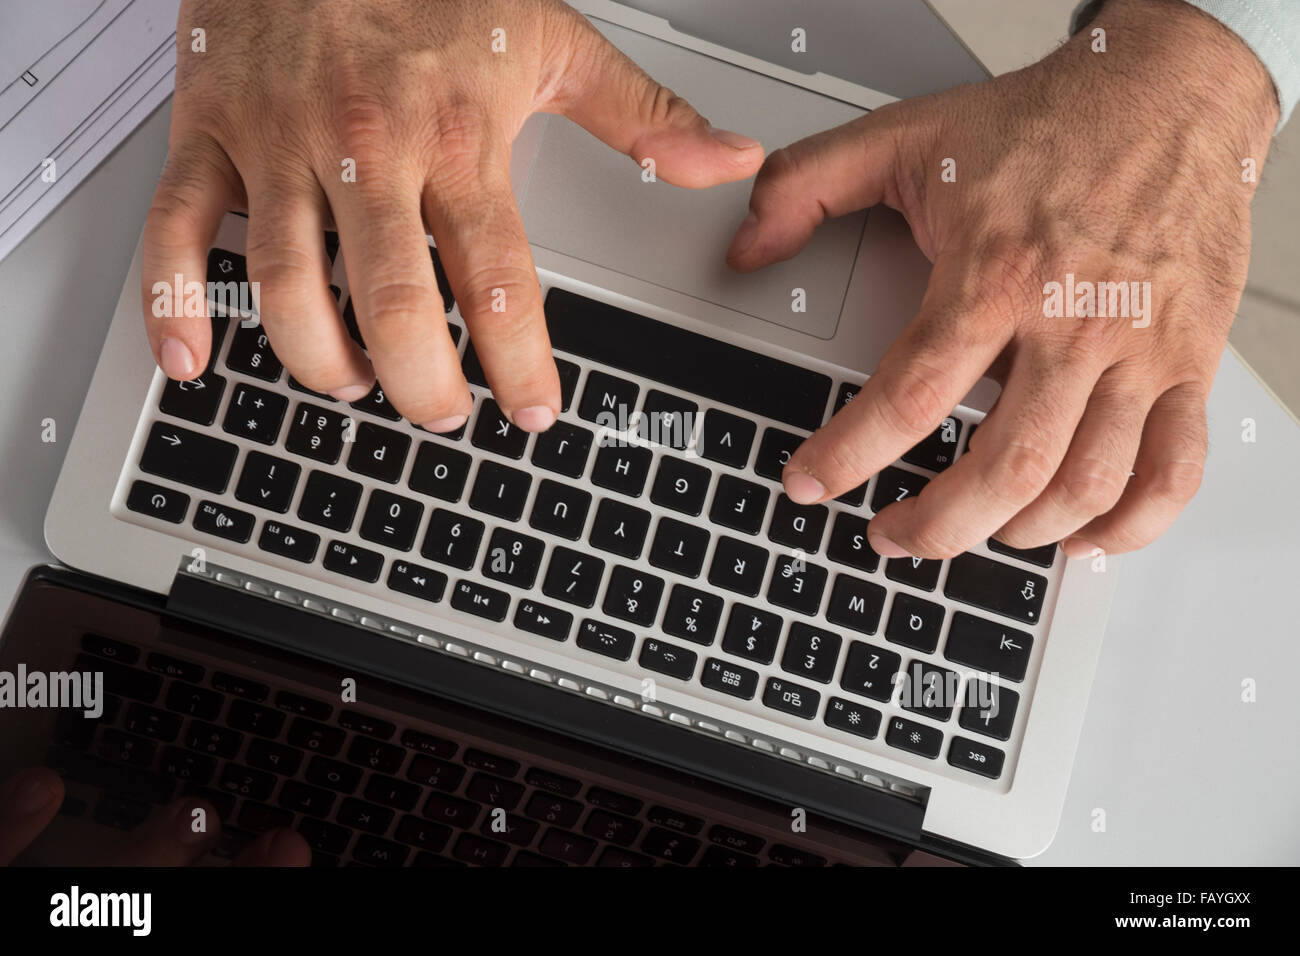 Fingers typing on a keyboard Stock Photo